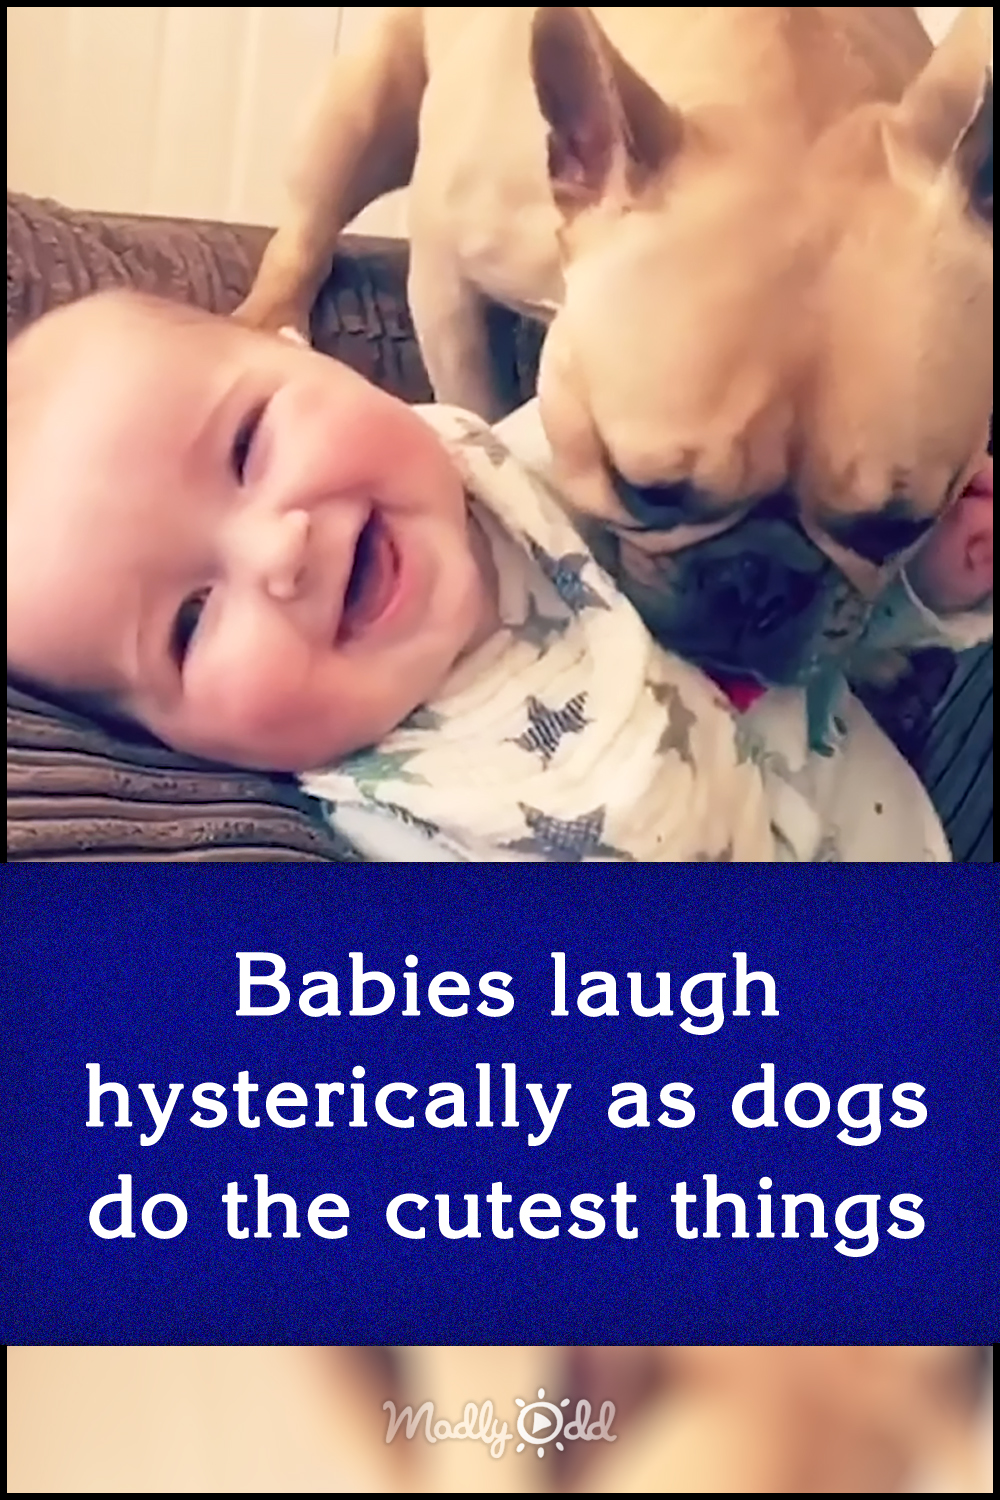 Babies laugh hysterically as dogs do the cutest things